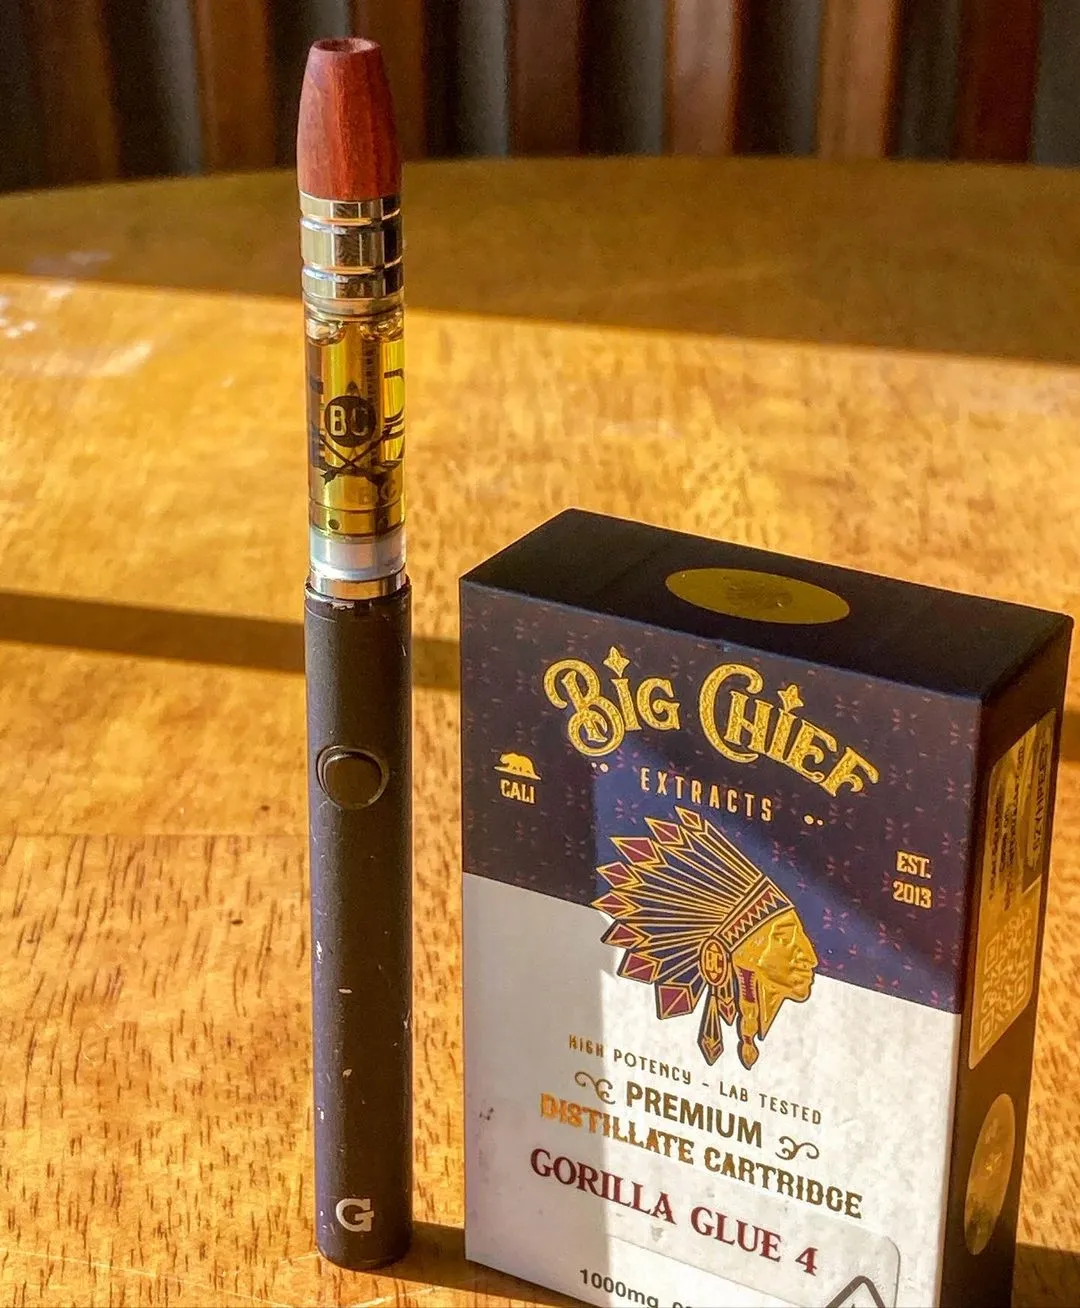 BIG CHIEF Extracts Vape Cartridges | Buy BIG CHIEF Extracts UK